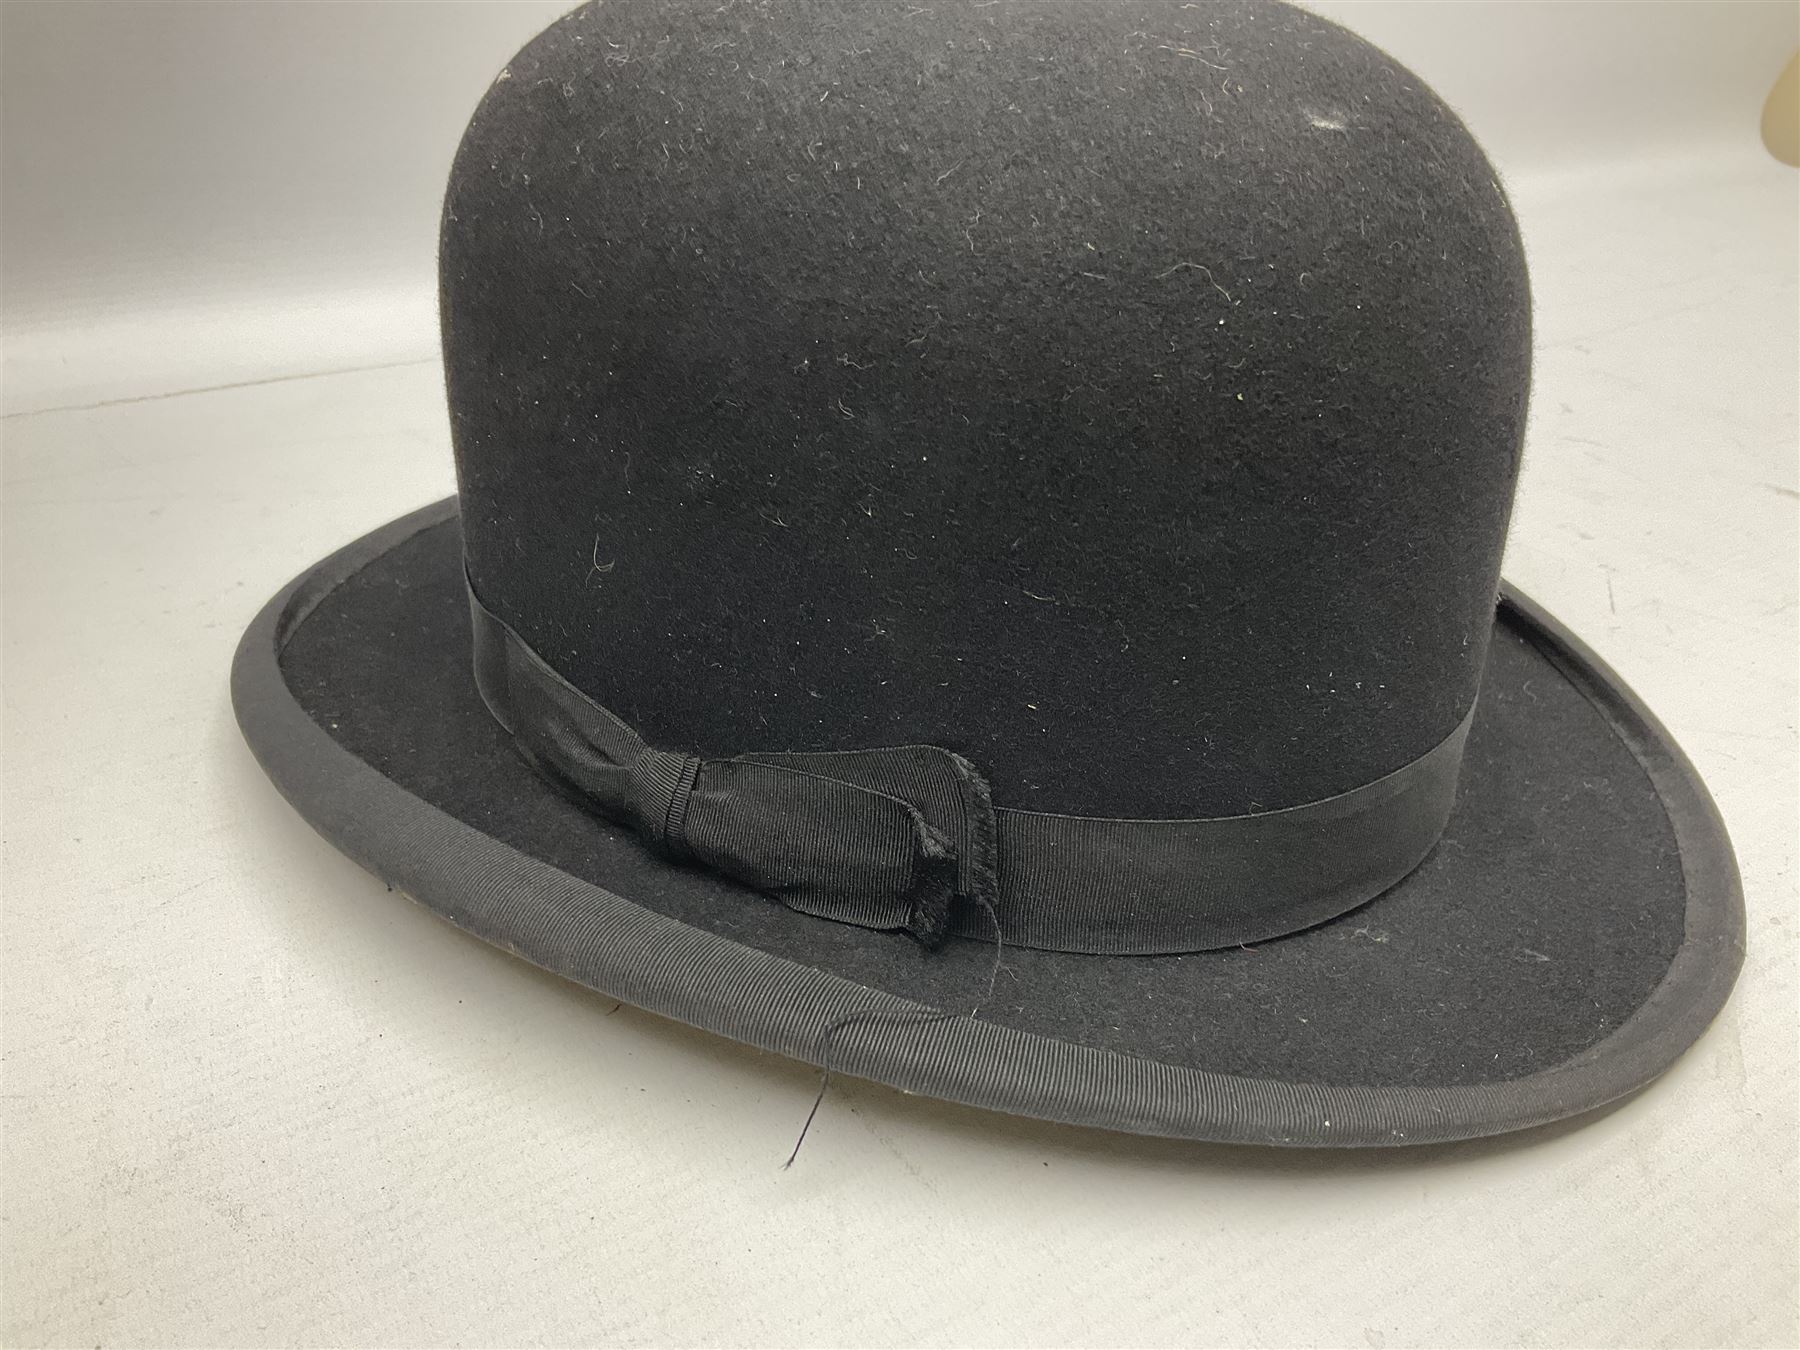 Bowler hat in leather hat box W36cm - Image 5 of 8